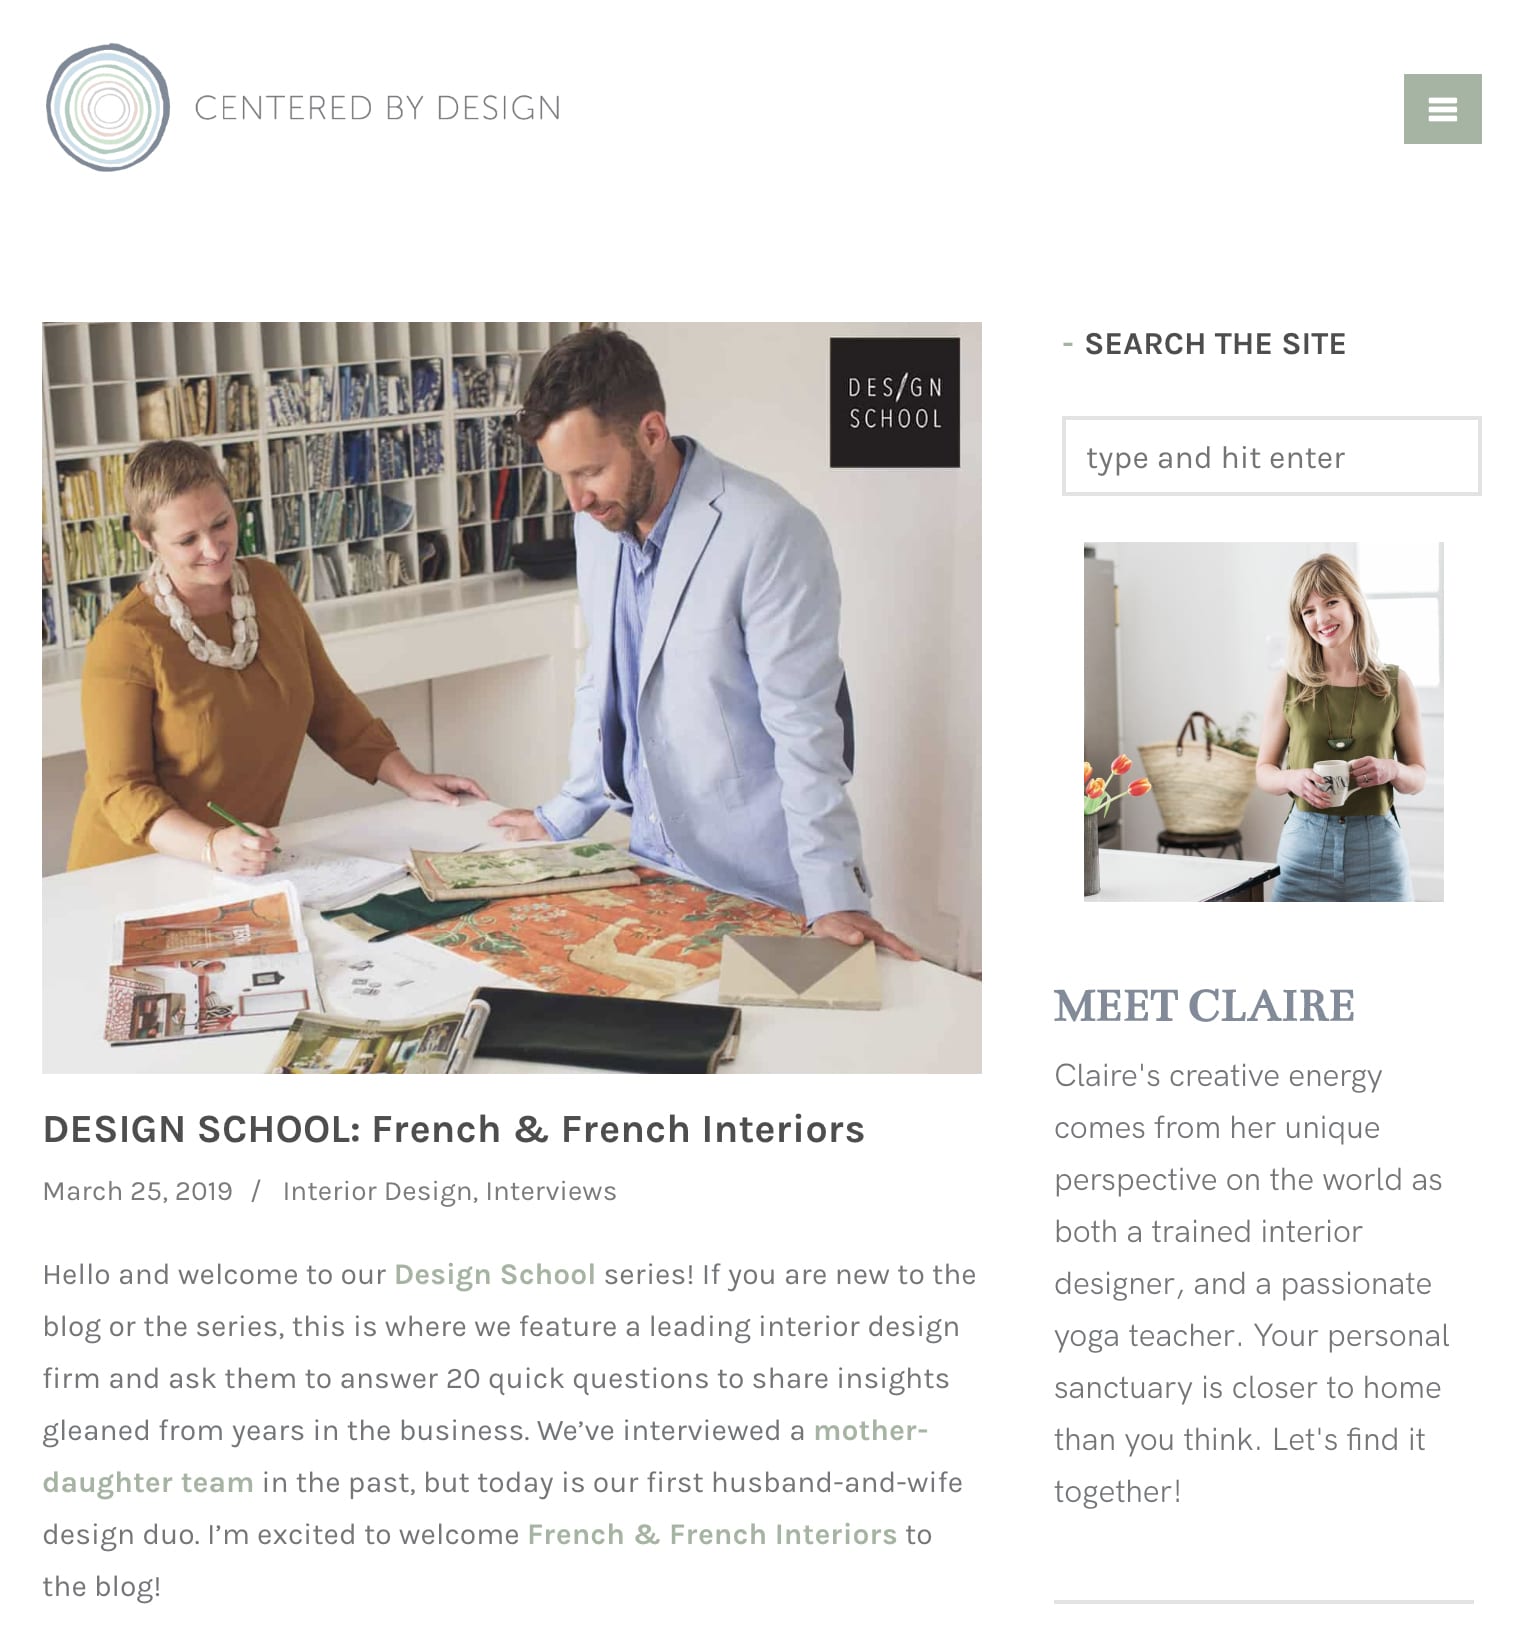 DESIGN SCHOOL: French centered by design article featuring french and french interiors